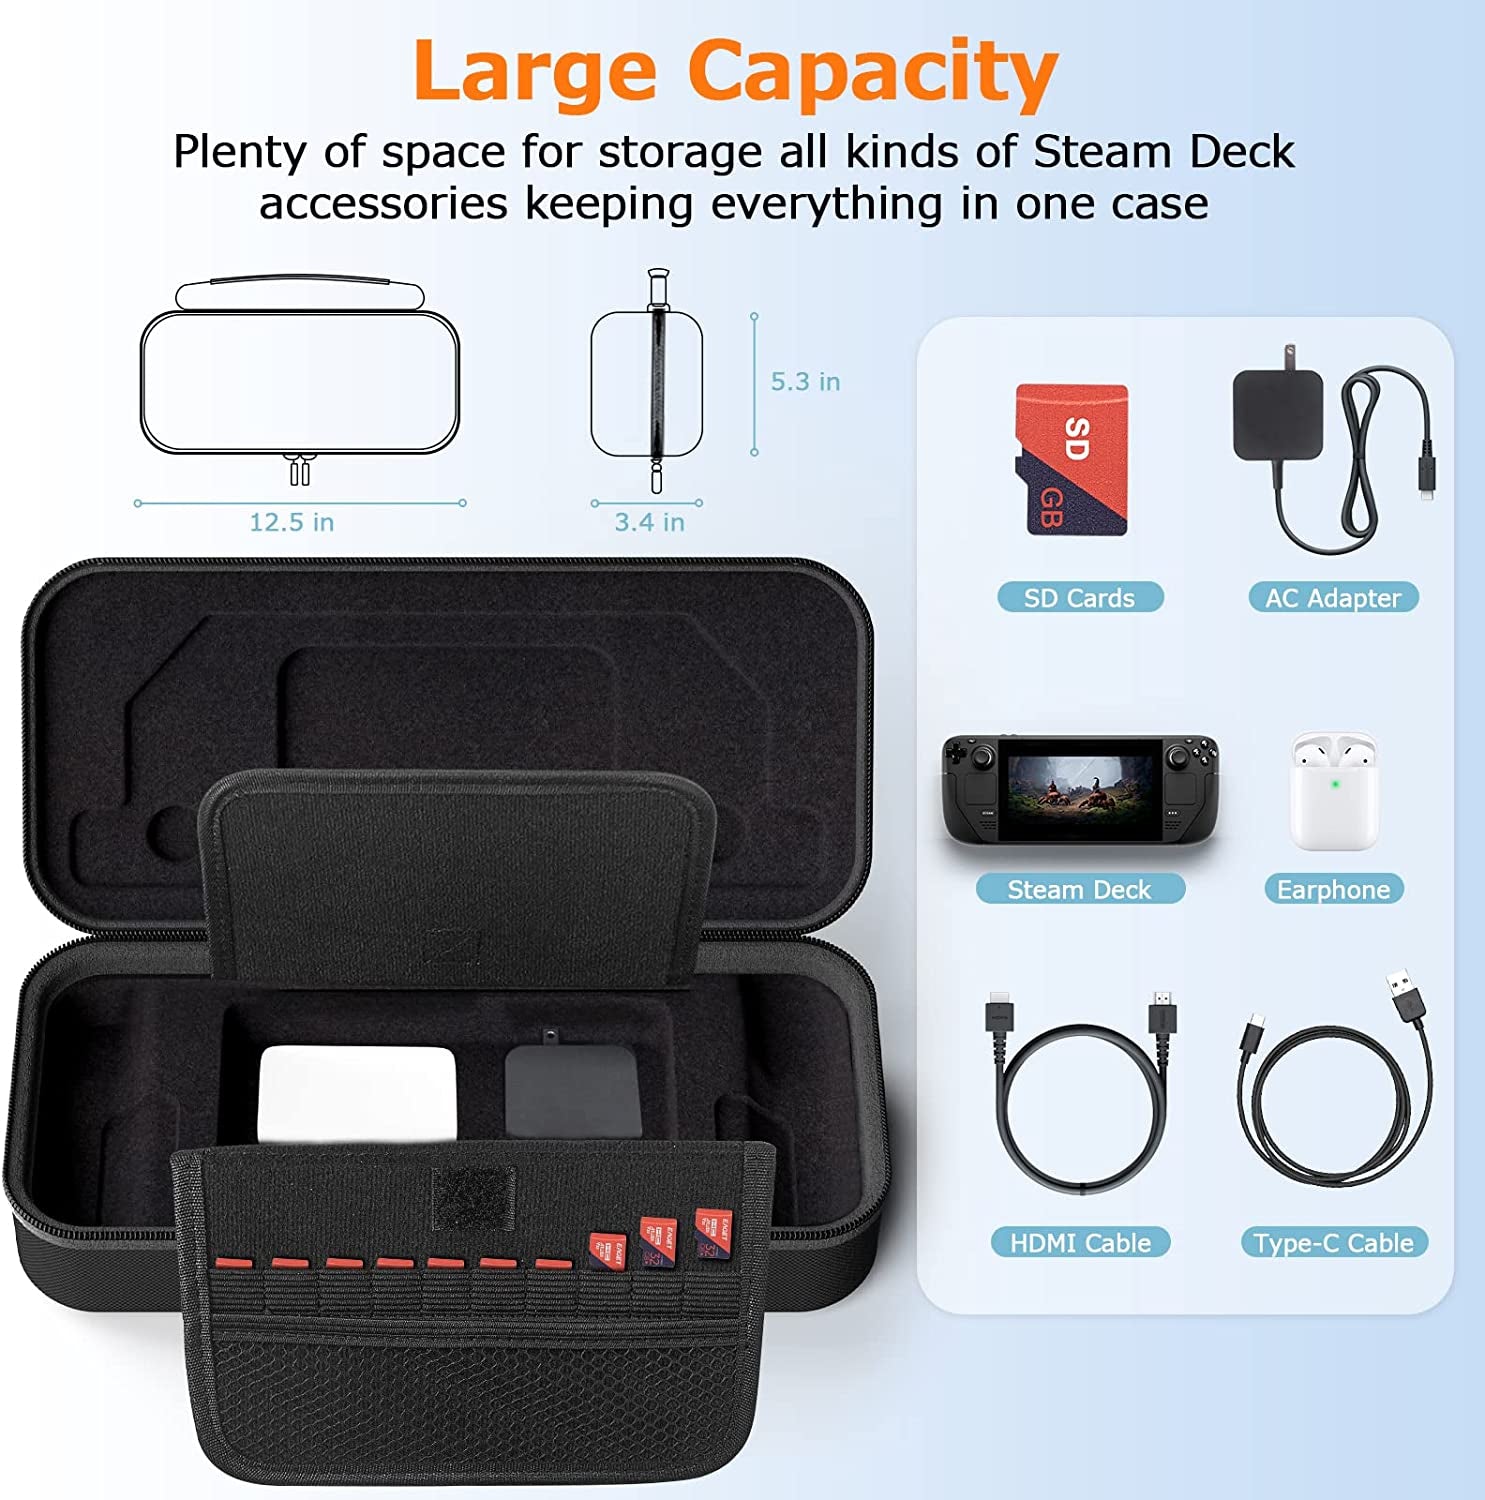 Carrying Case Compatible with Steam Deck - Fit Charger AC Adapter - with 10 SD Games Cartridges & Stand Hard Shell Travel Pouch for Steam Deck Console & Accessories, Black [Updated Version]